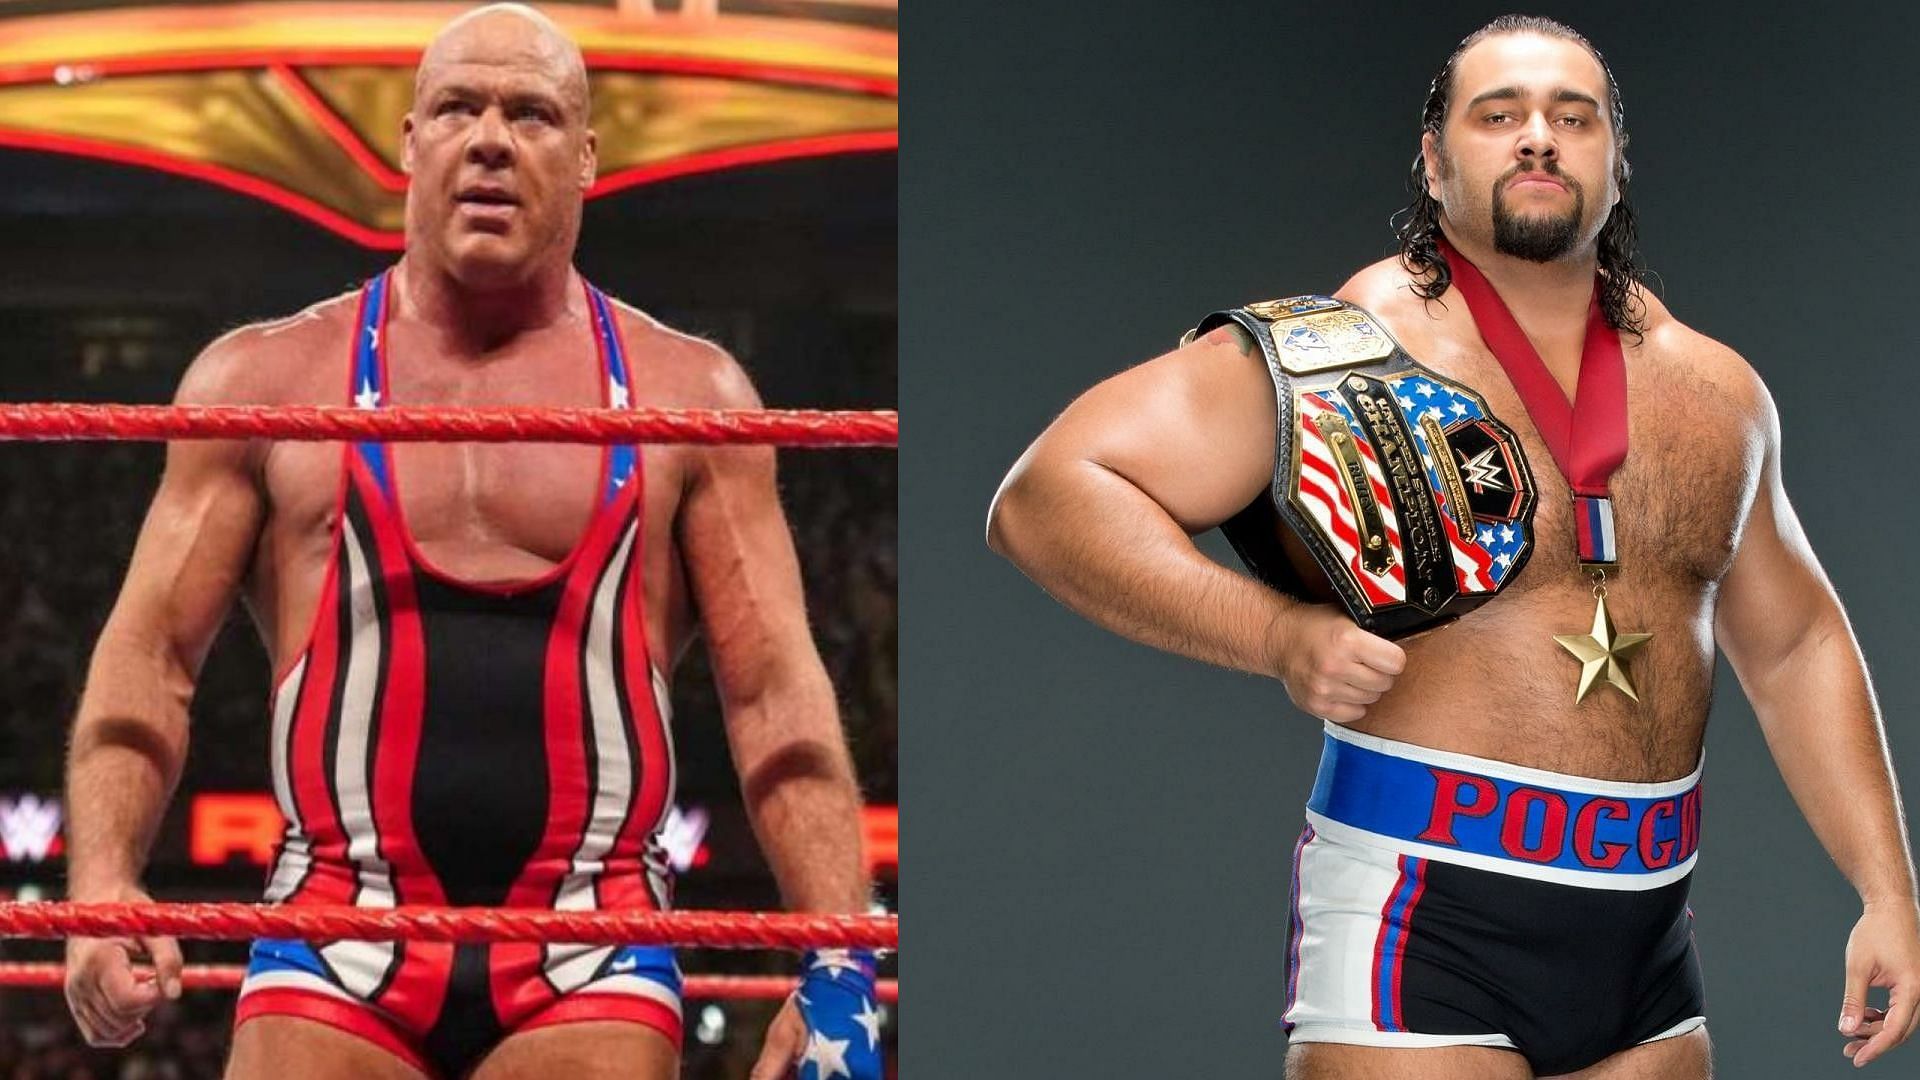 5 WWE Superstars released in 2020: where are they now?